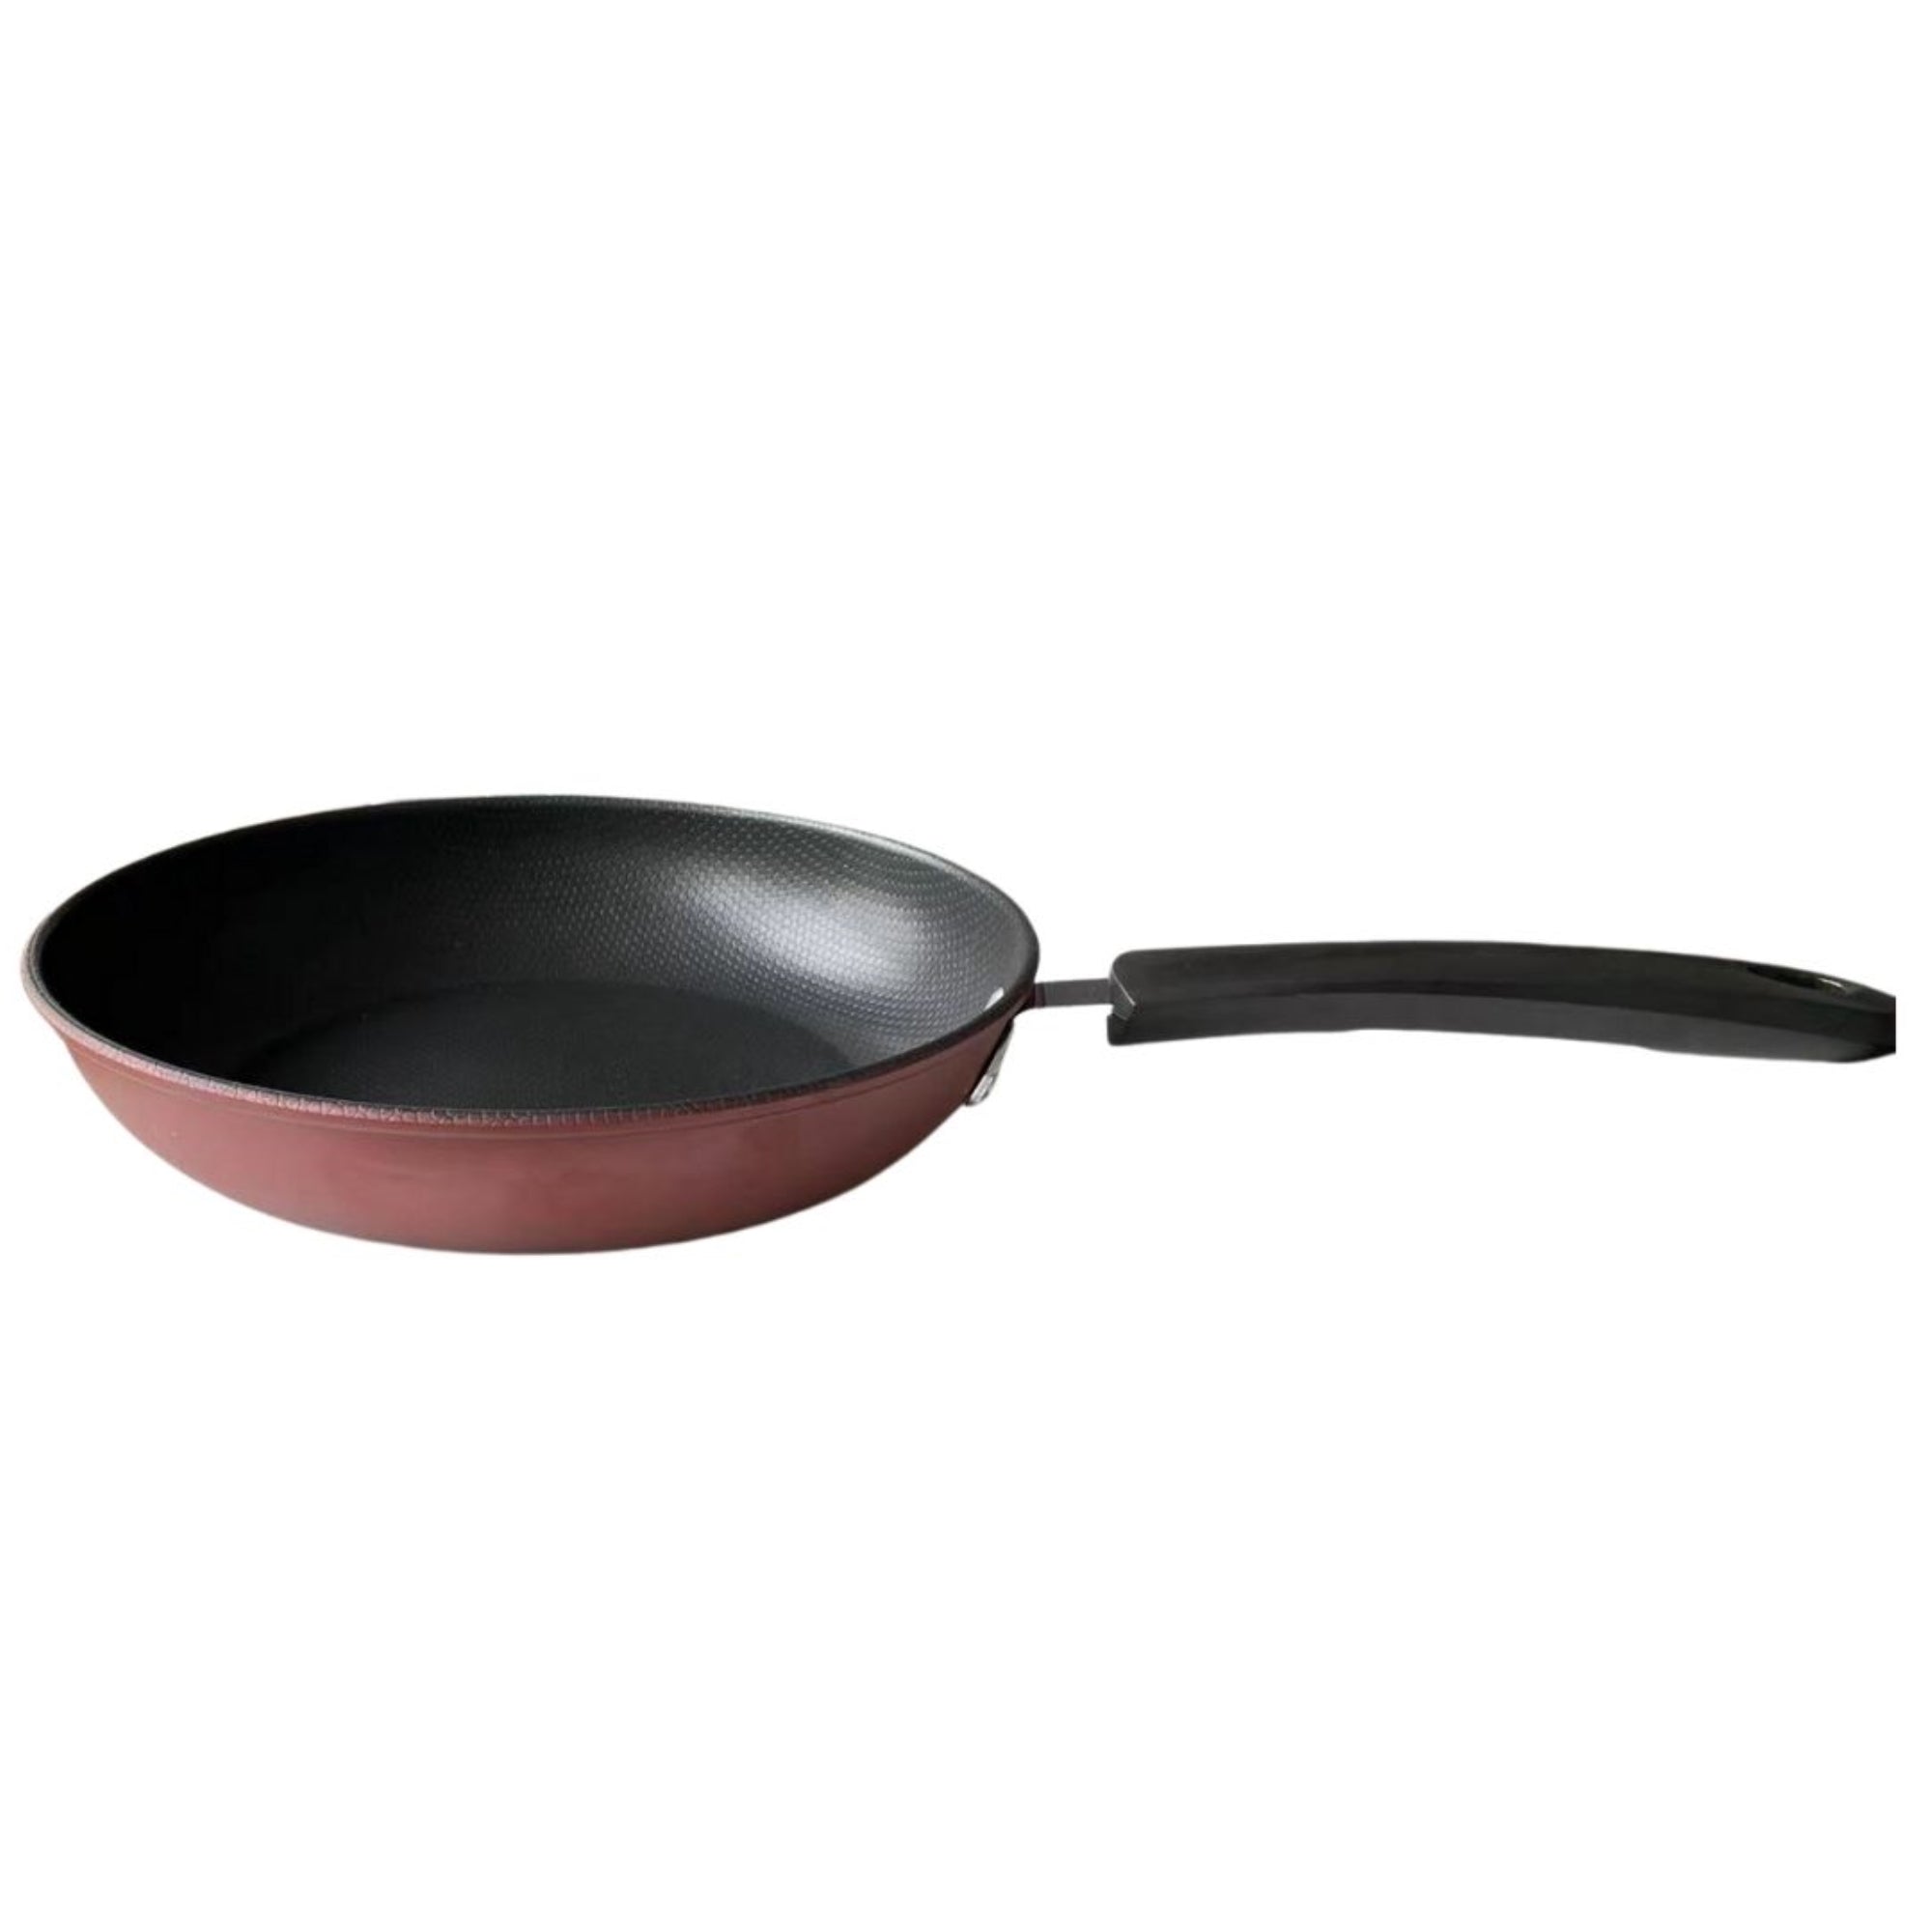 Kitchenaid Fry Pans, Nonstick, Twin Pack